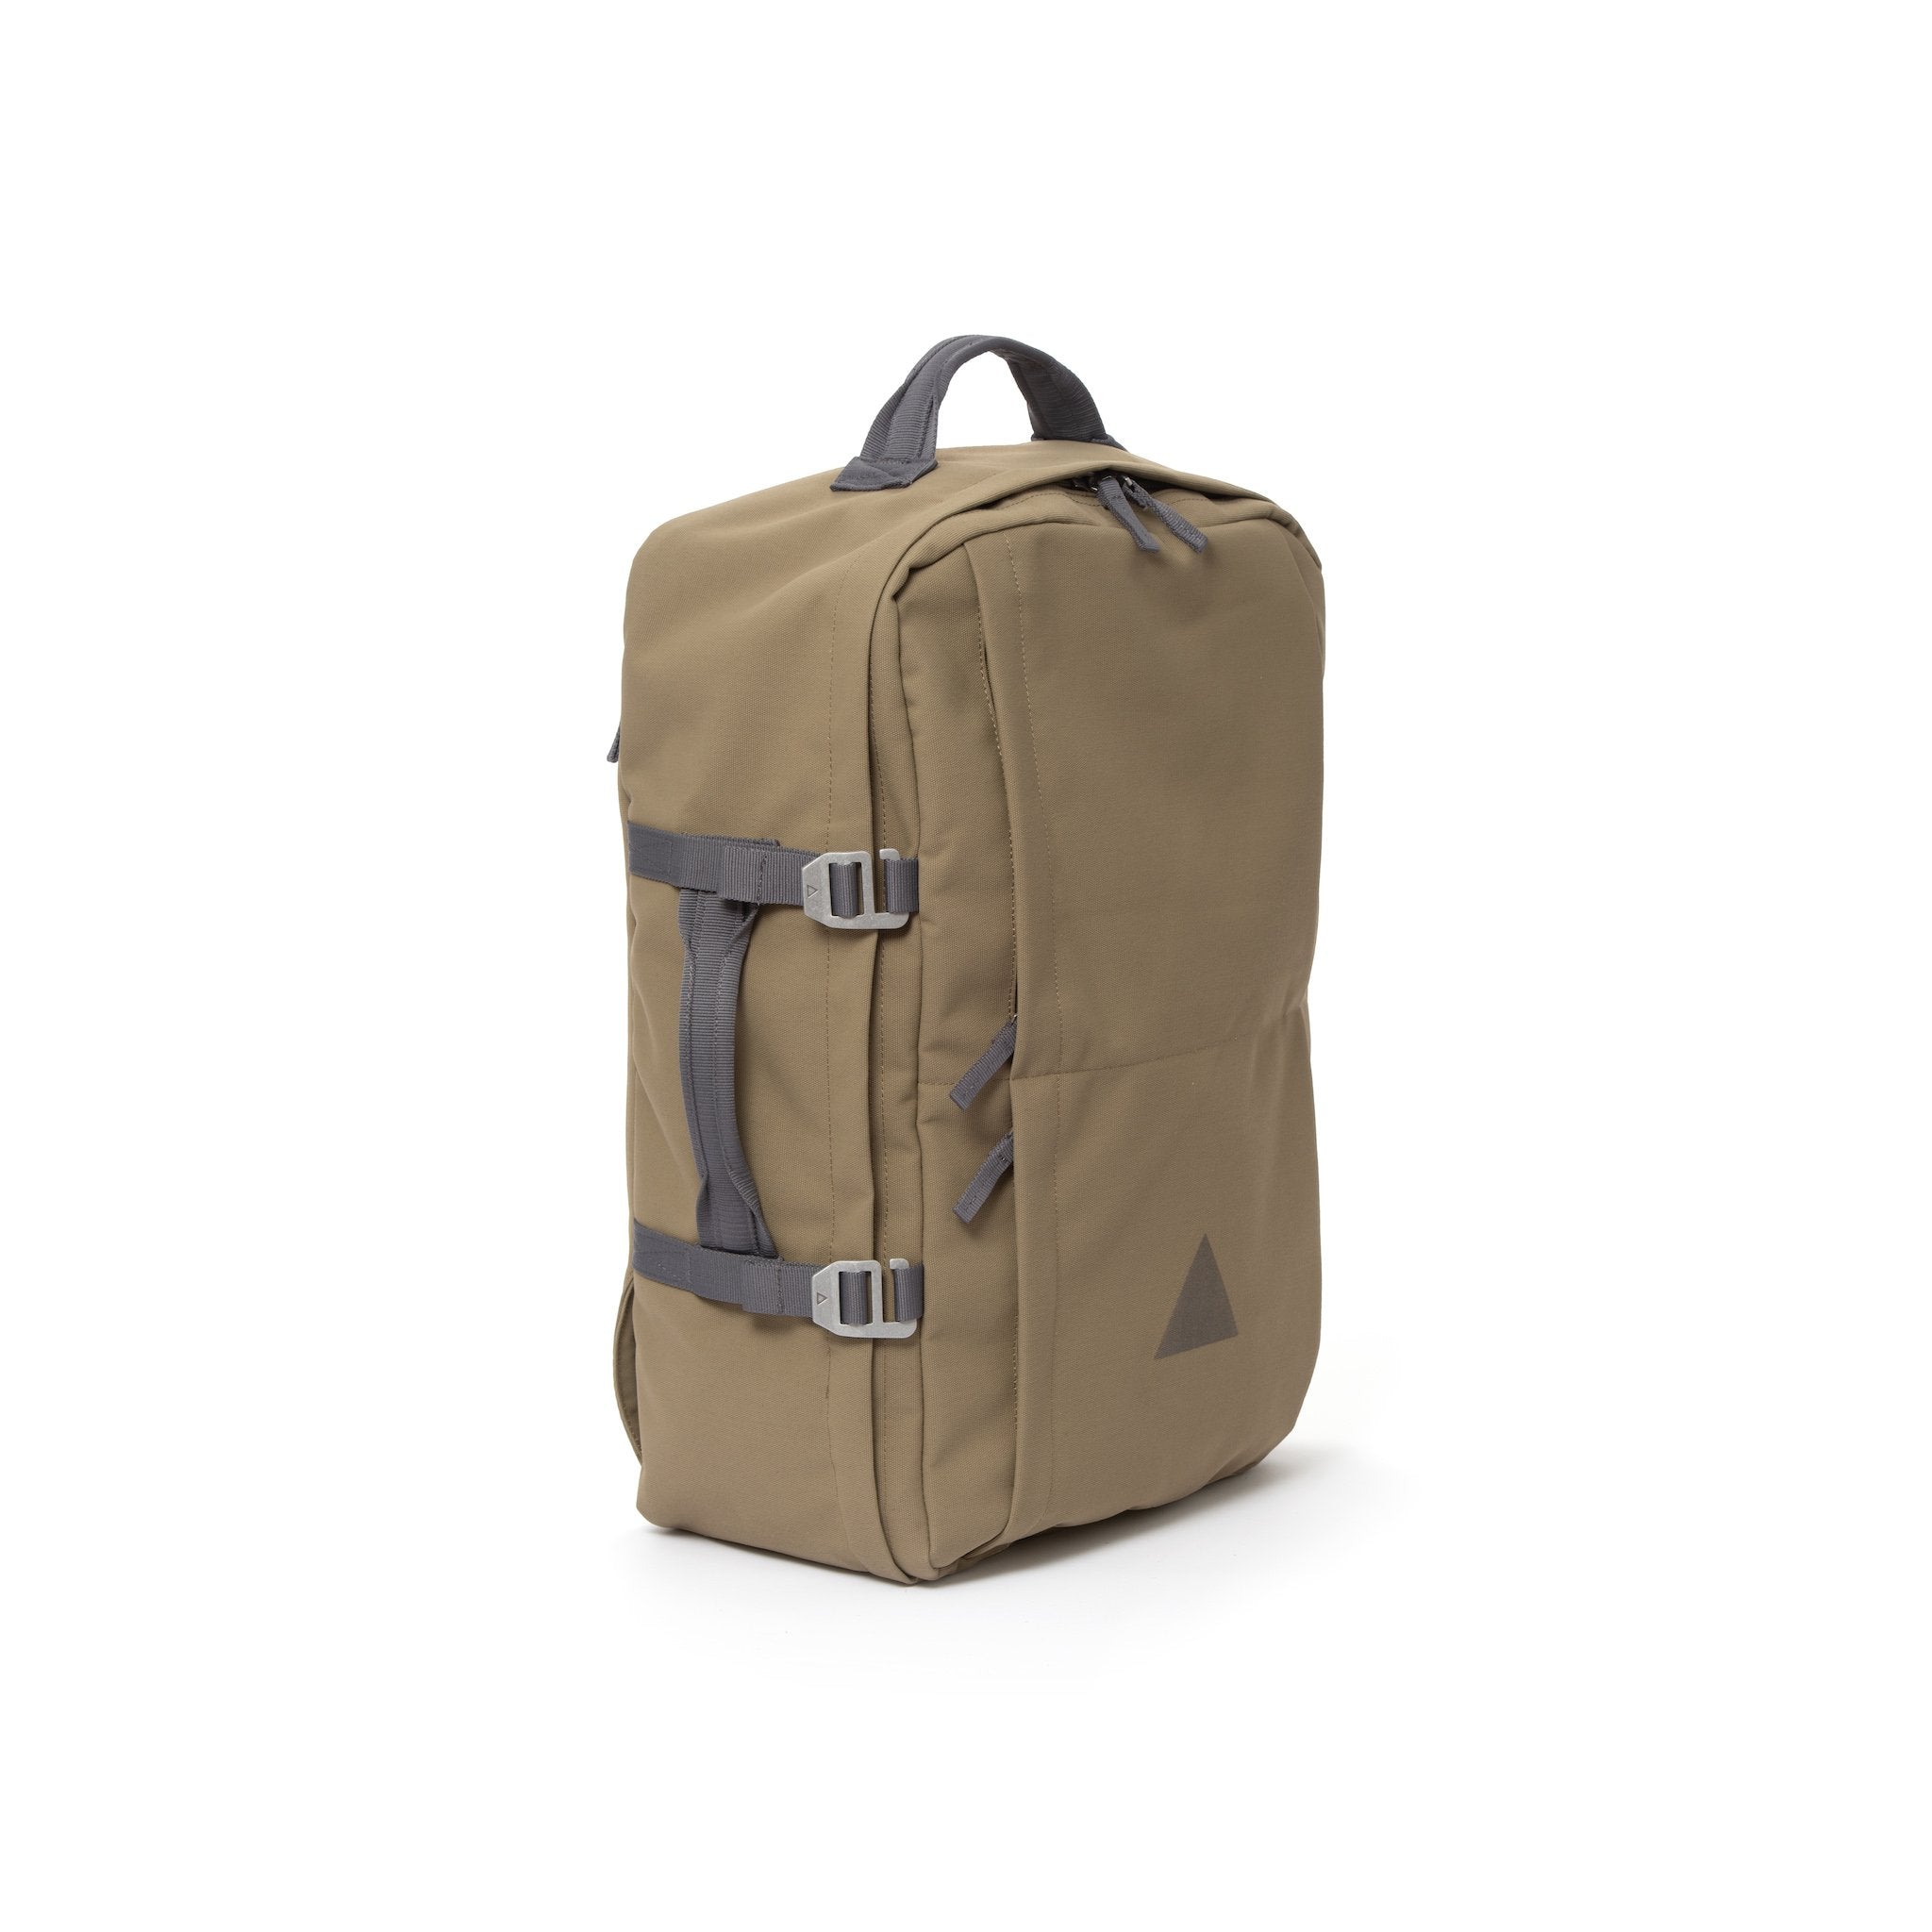 Khaki recycled canvas travel backpack with carry handle.